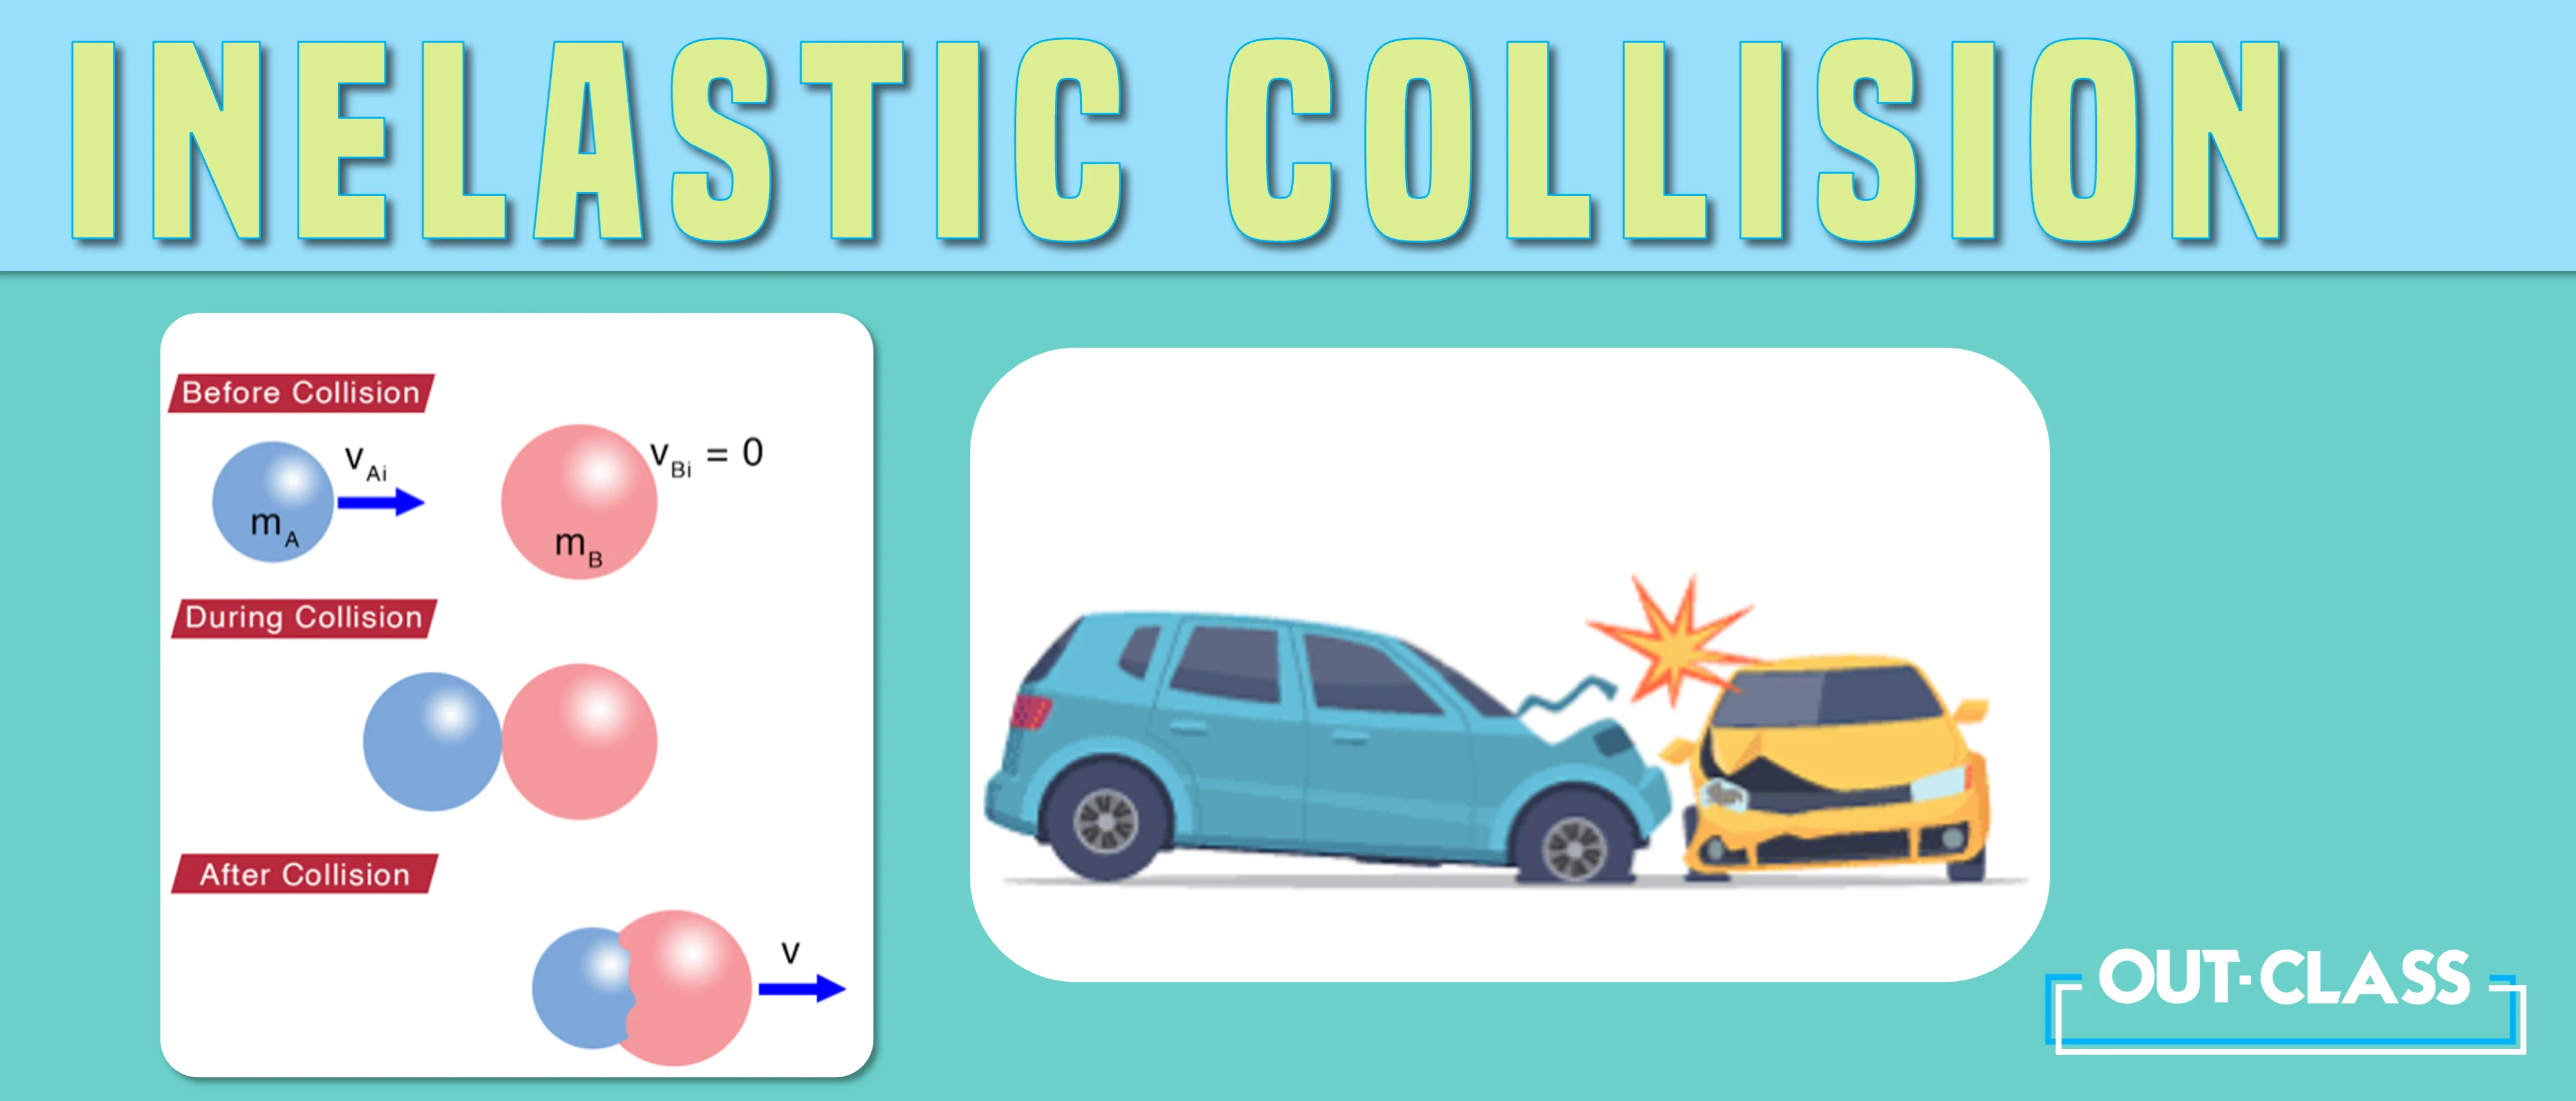 it shows inelastic collision vs elastic collision with inelastic collision examples. This occurs when to try to determine if a collision is elastic or inelastic.